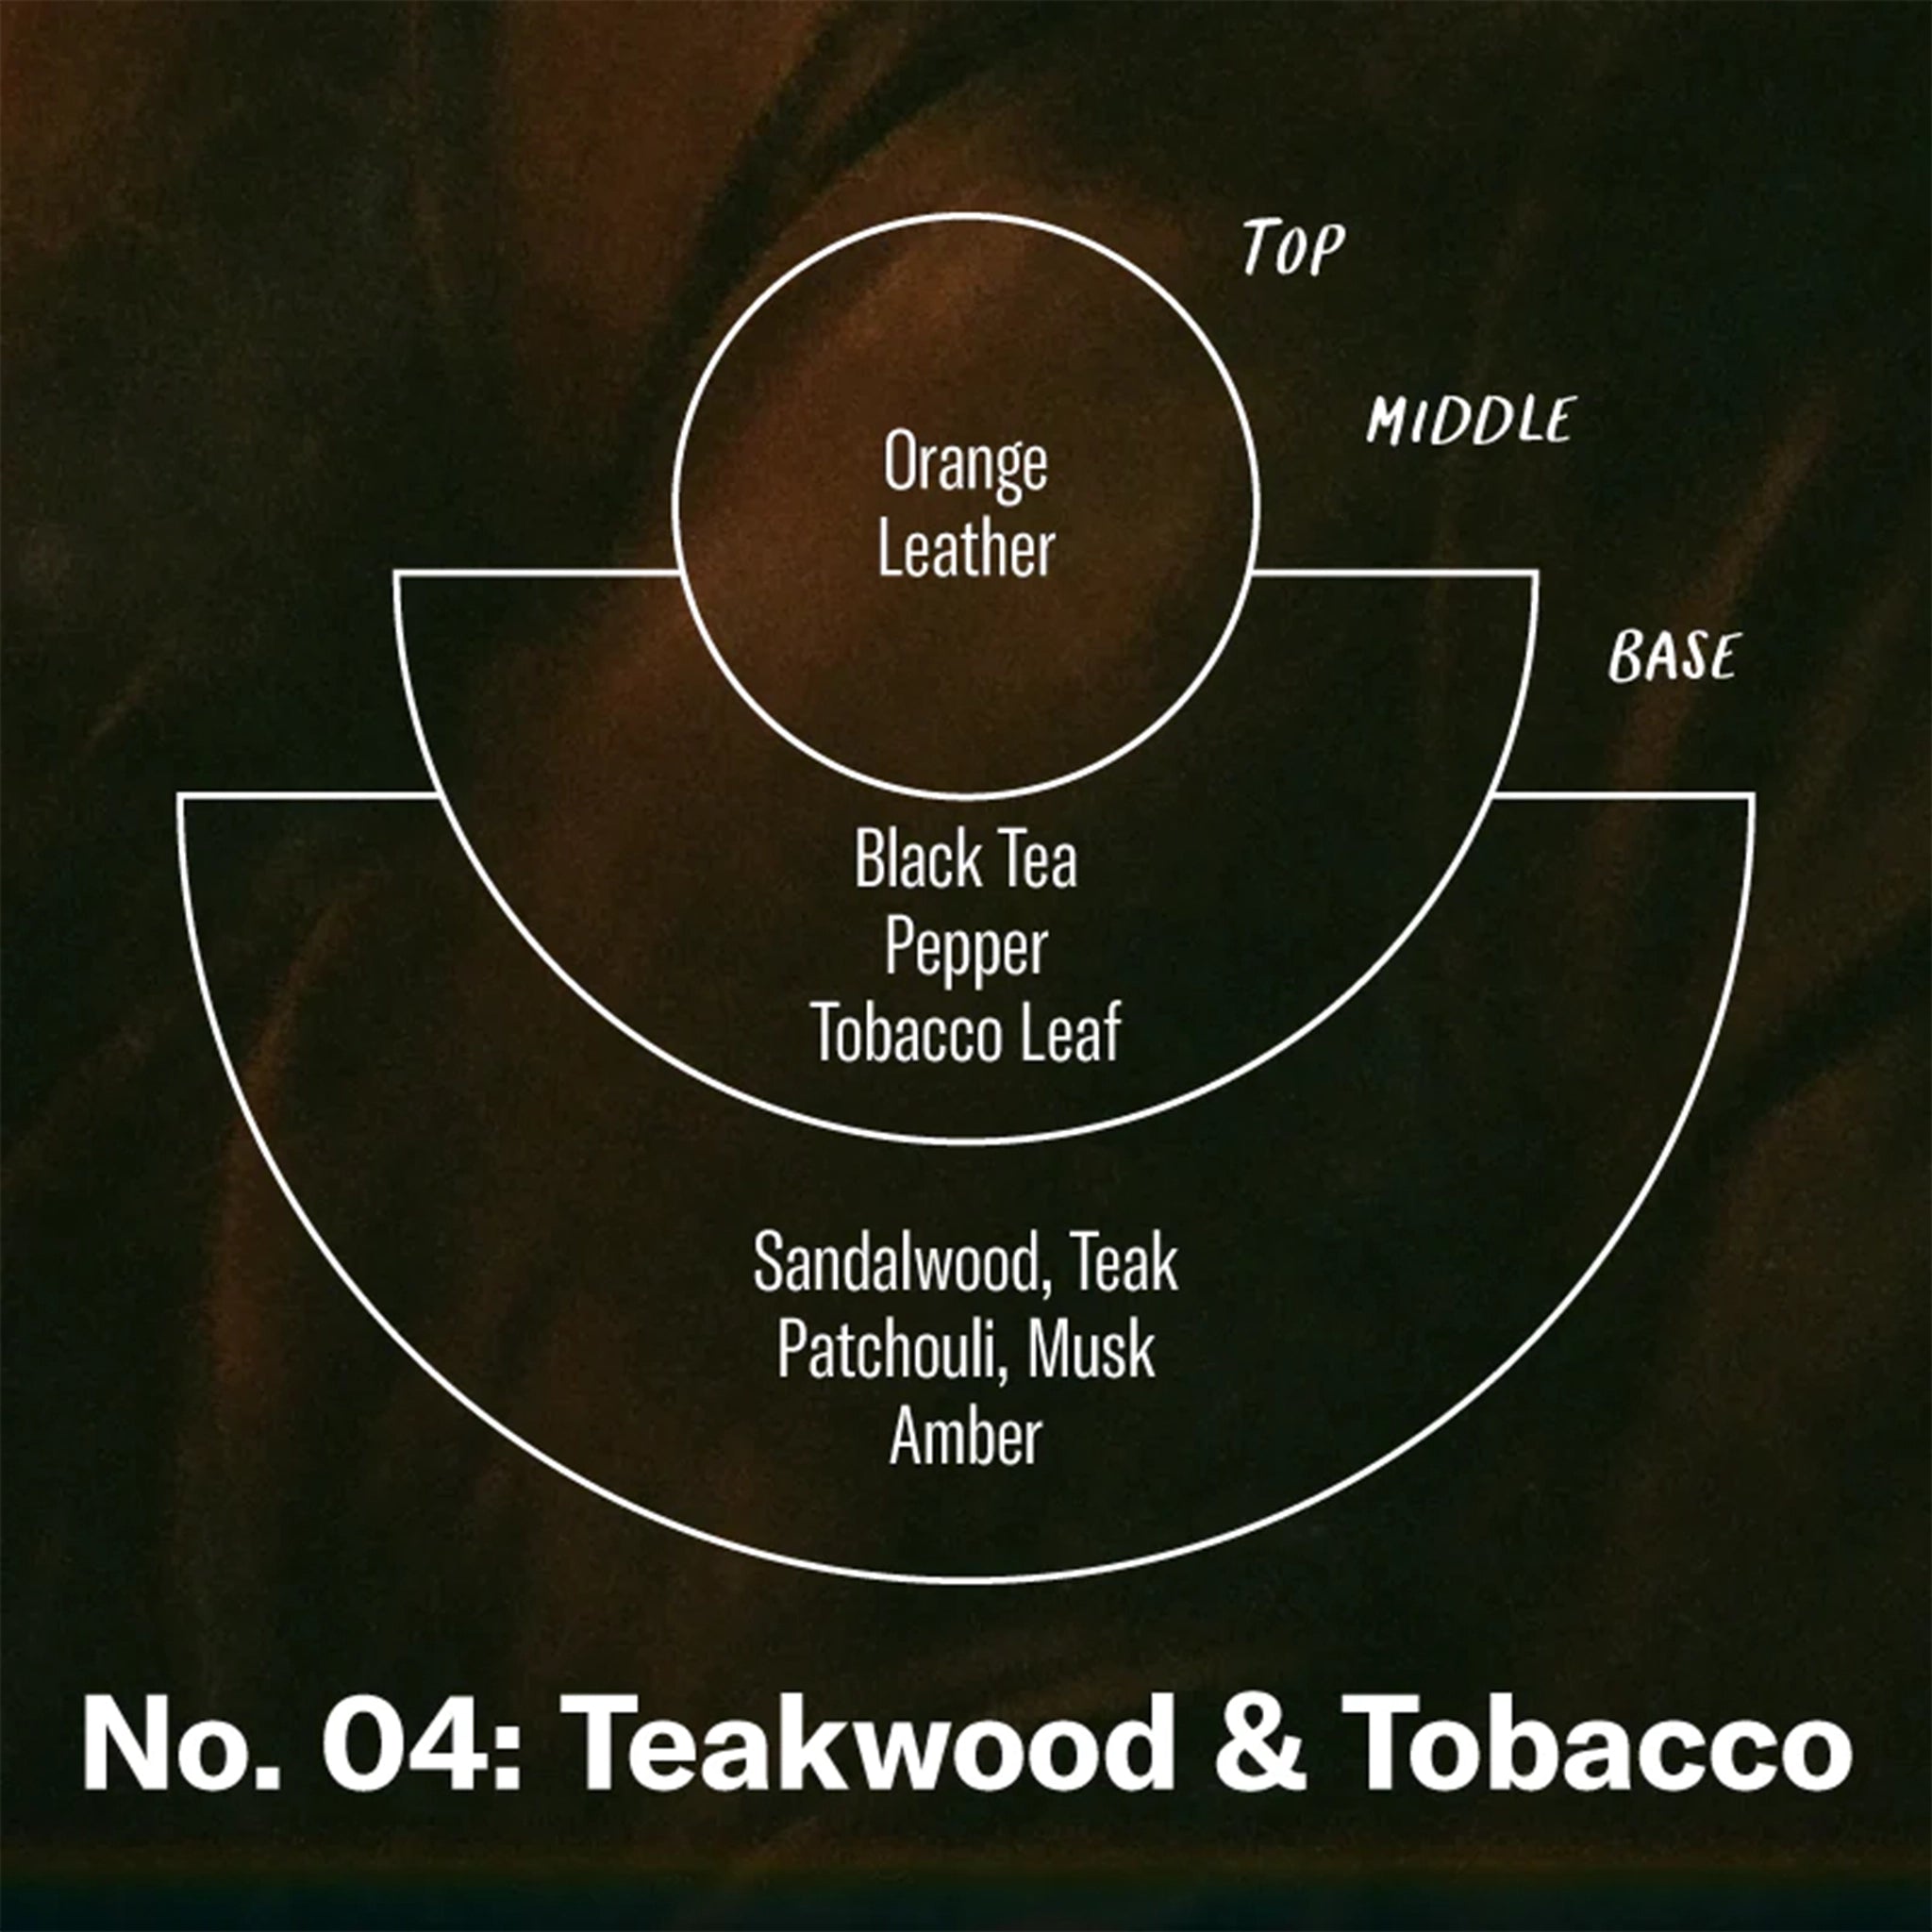 A diagram of the notes within the candle that include top notes of orange and leather, middle notes of black tea, pepper, and tobacco leaf and base notes of sandalwood, teak, patchouli, musk and amber. 